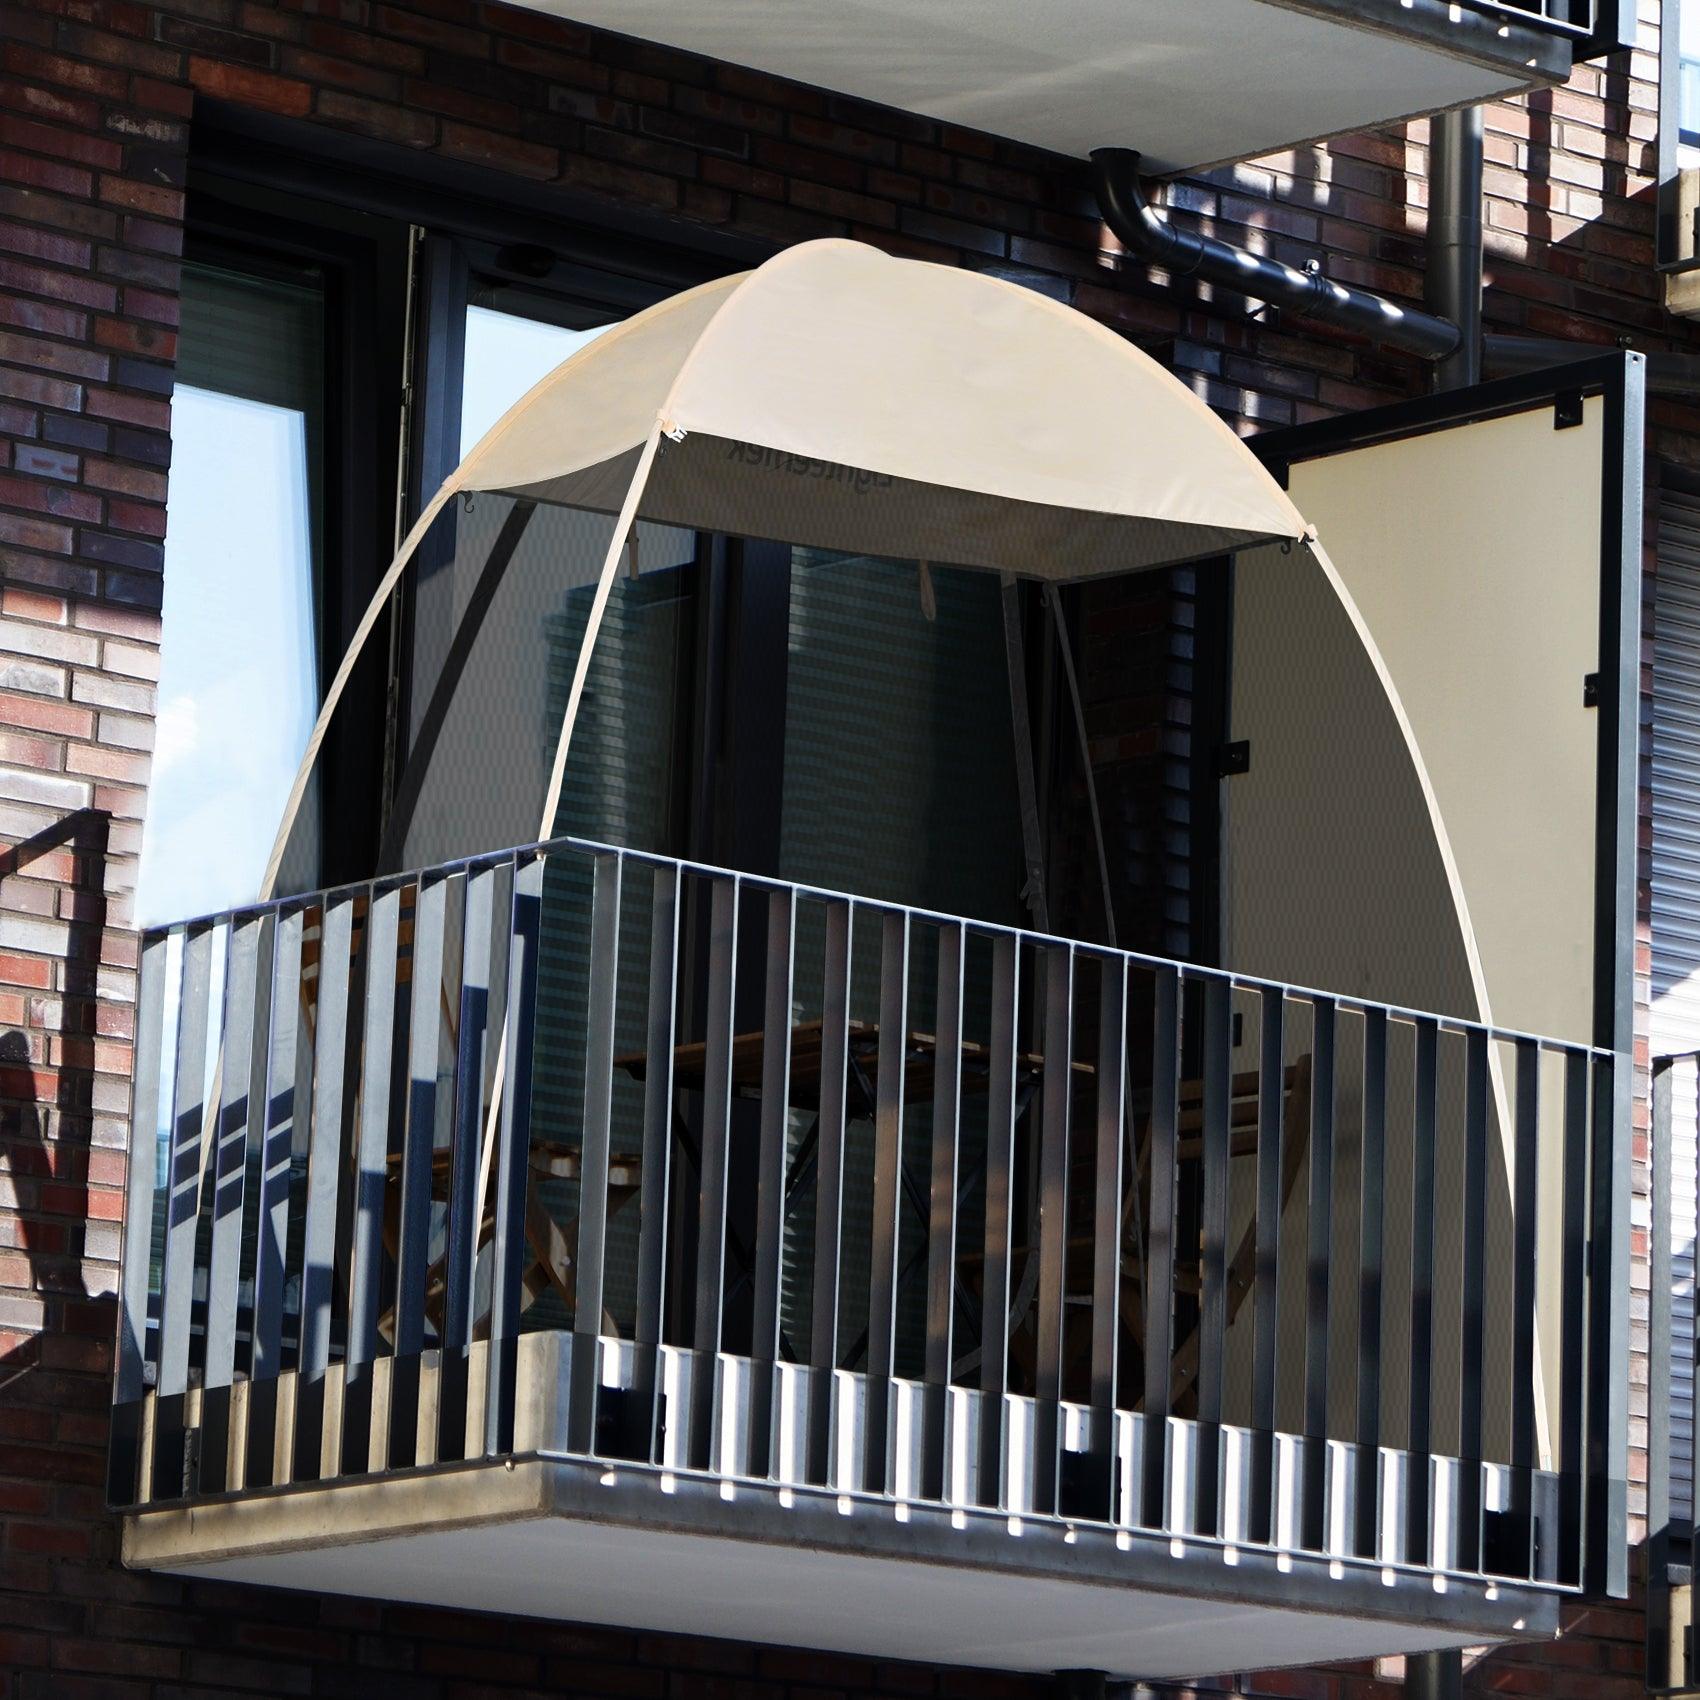 7'x4' Pop Up Screen House is suitable for New York city apartment balcony